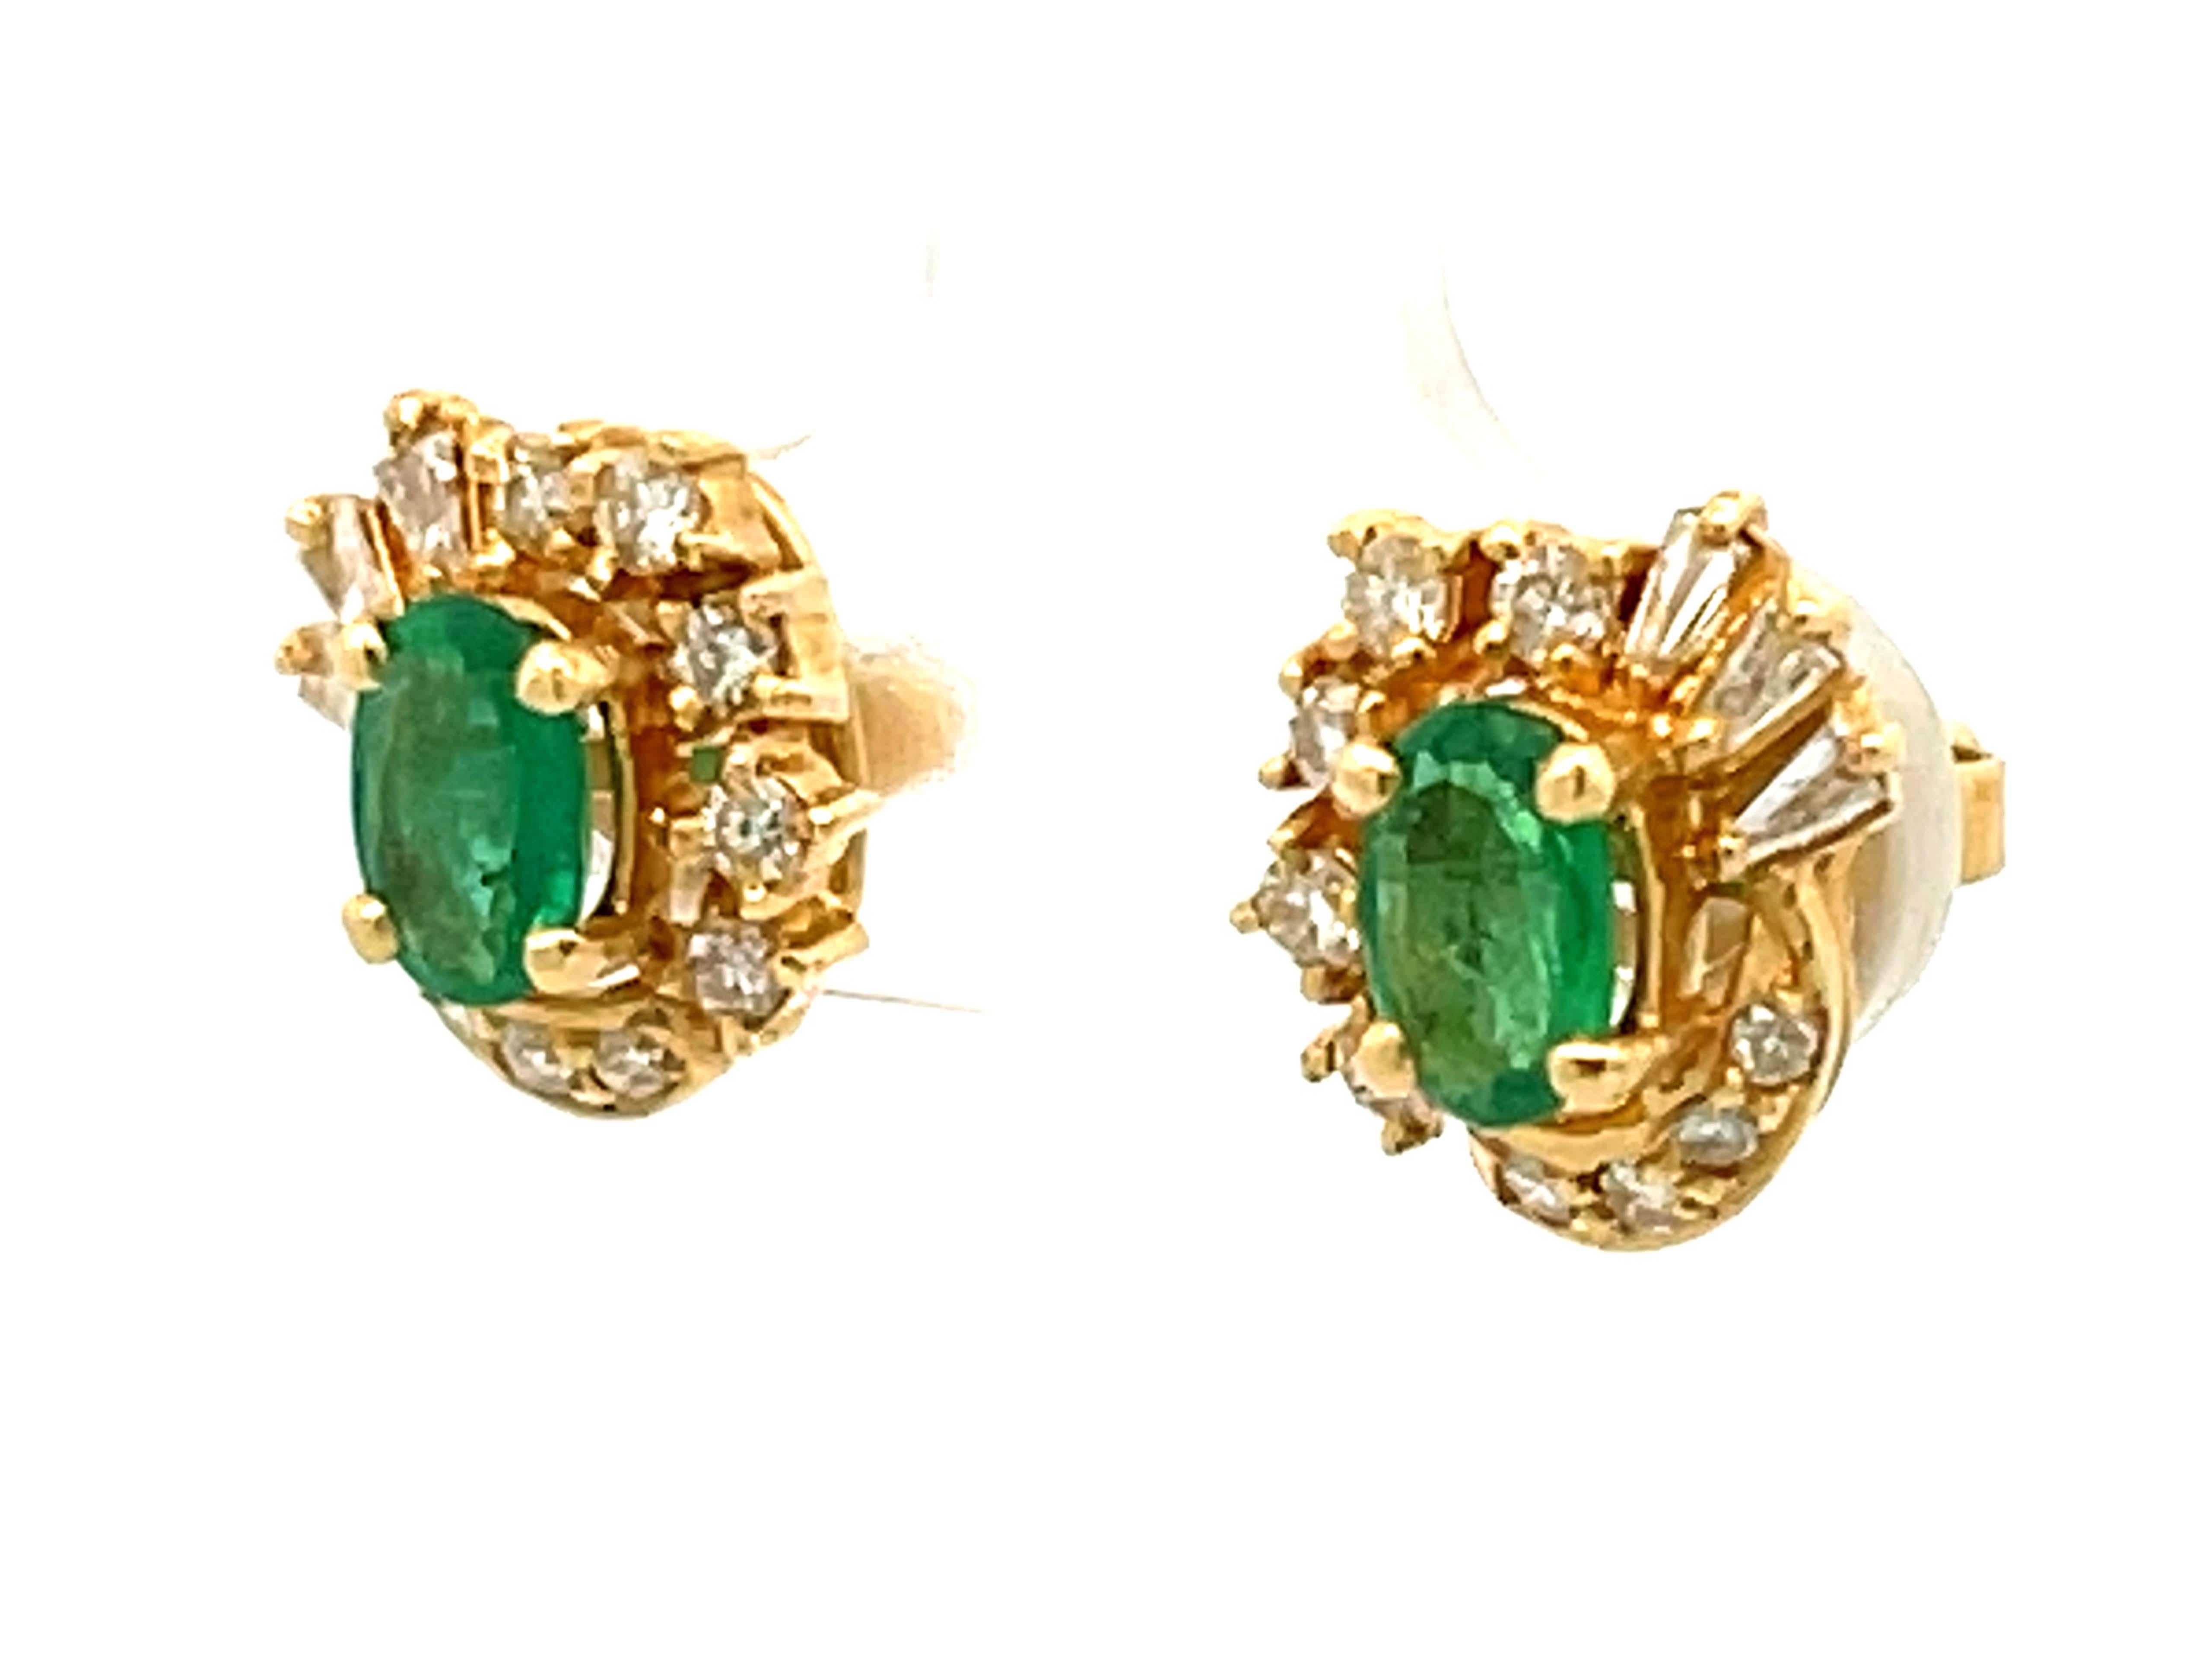 Brilliant Cut Columbian Emerald and Diamond Halo Stud Earrings in 18k Yellow Gold For Sale